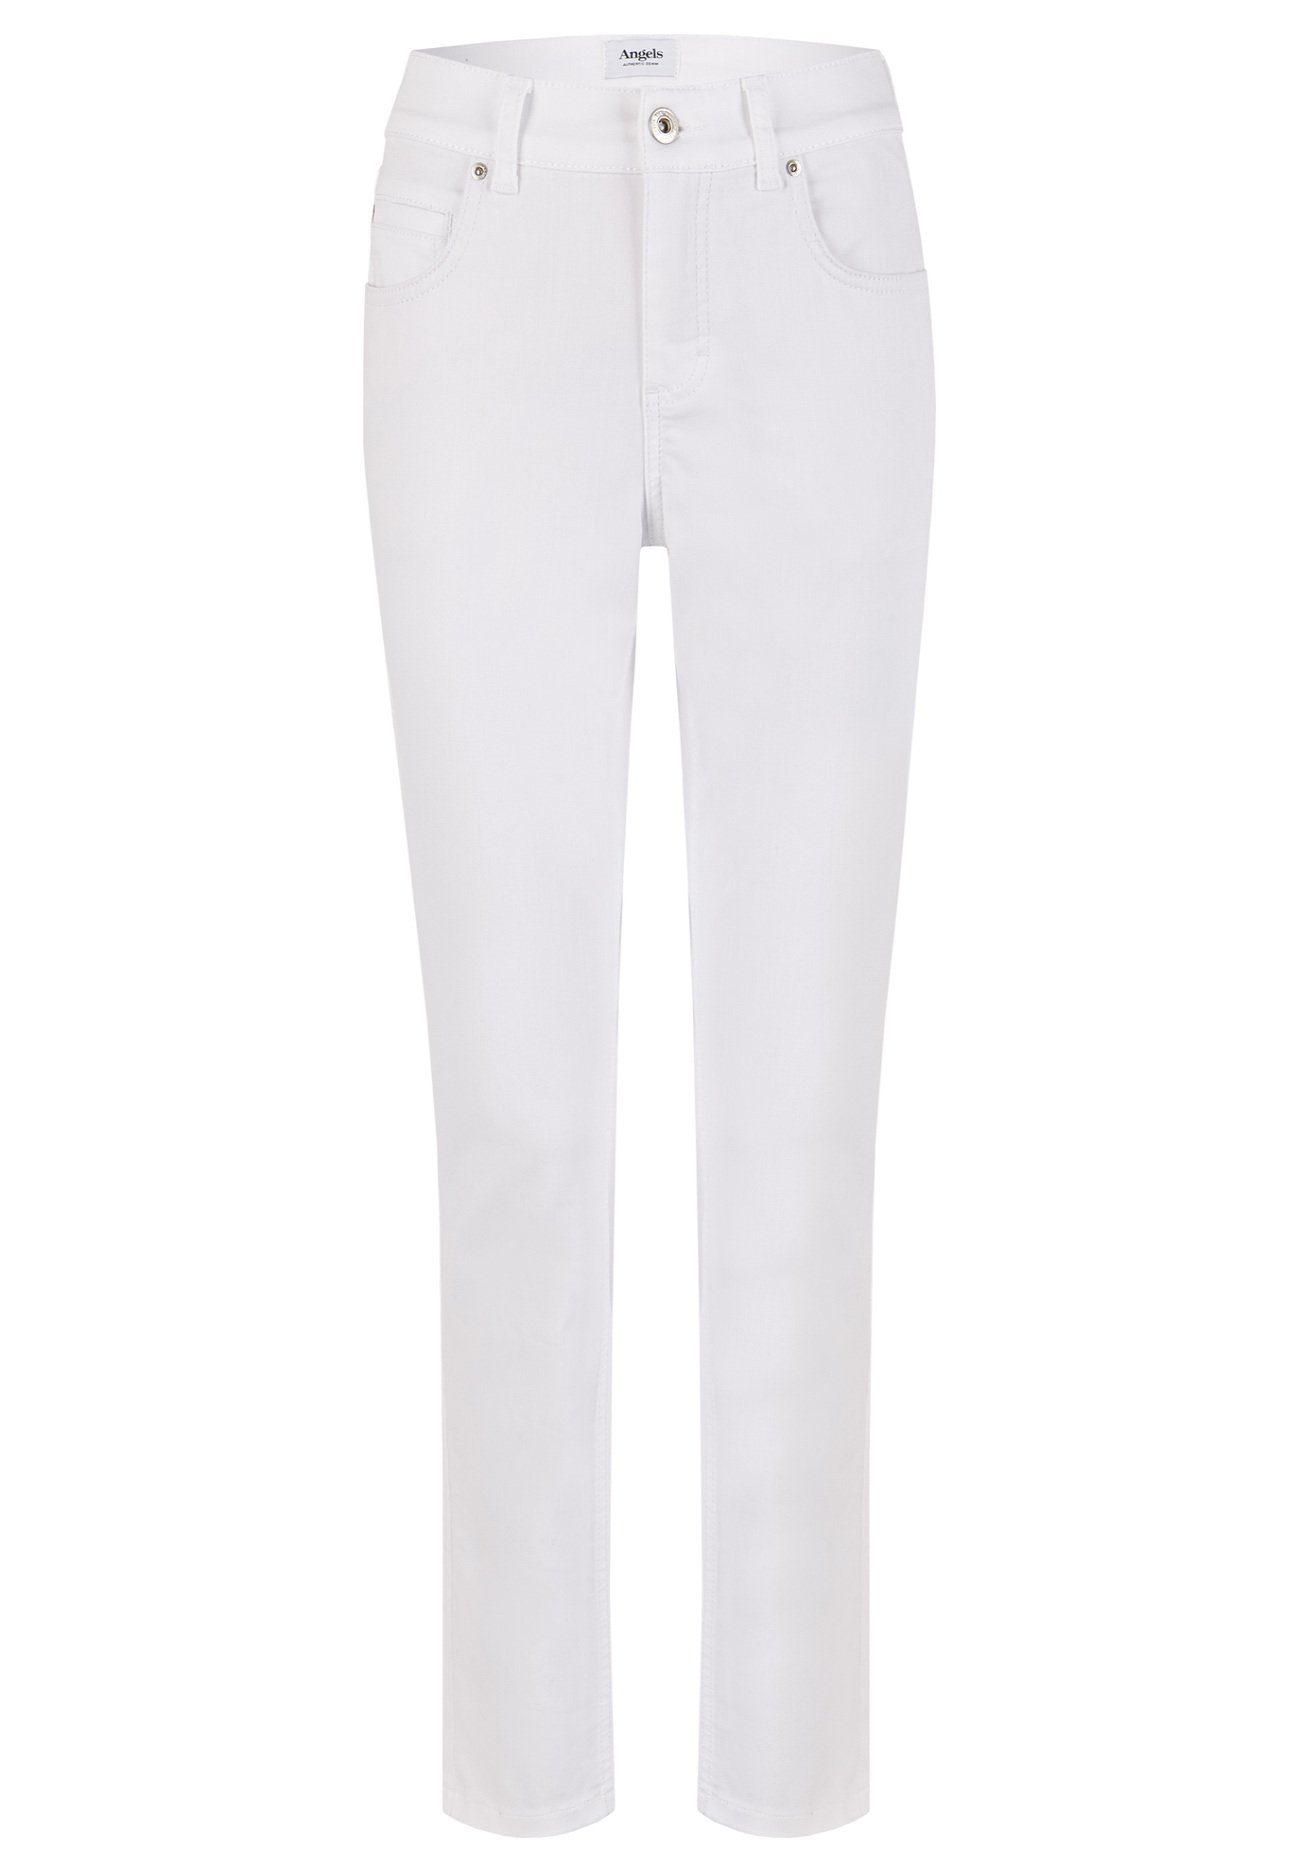 332 STRETCH ANGELS ANGELS - 3400.70 white CICI JEANS Stretch-Jeans